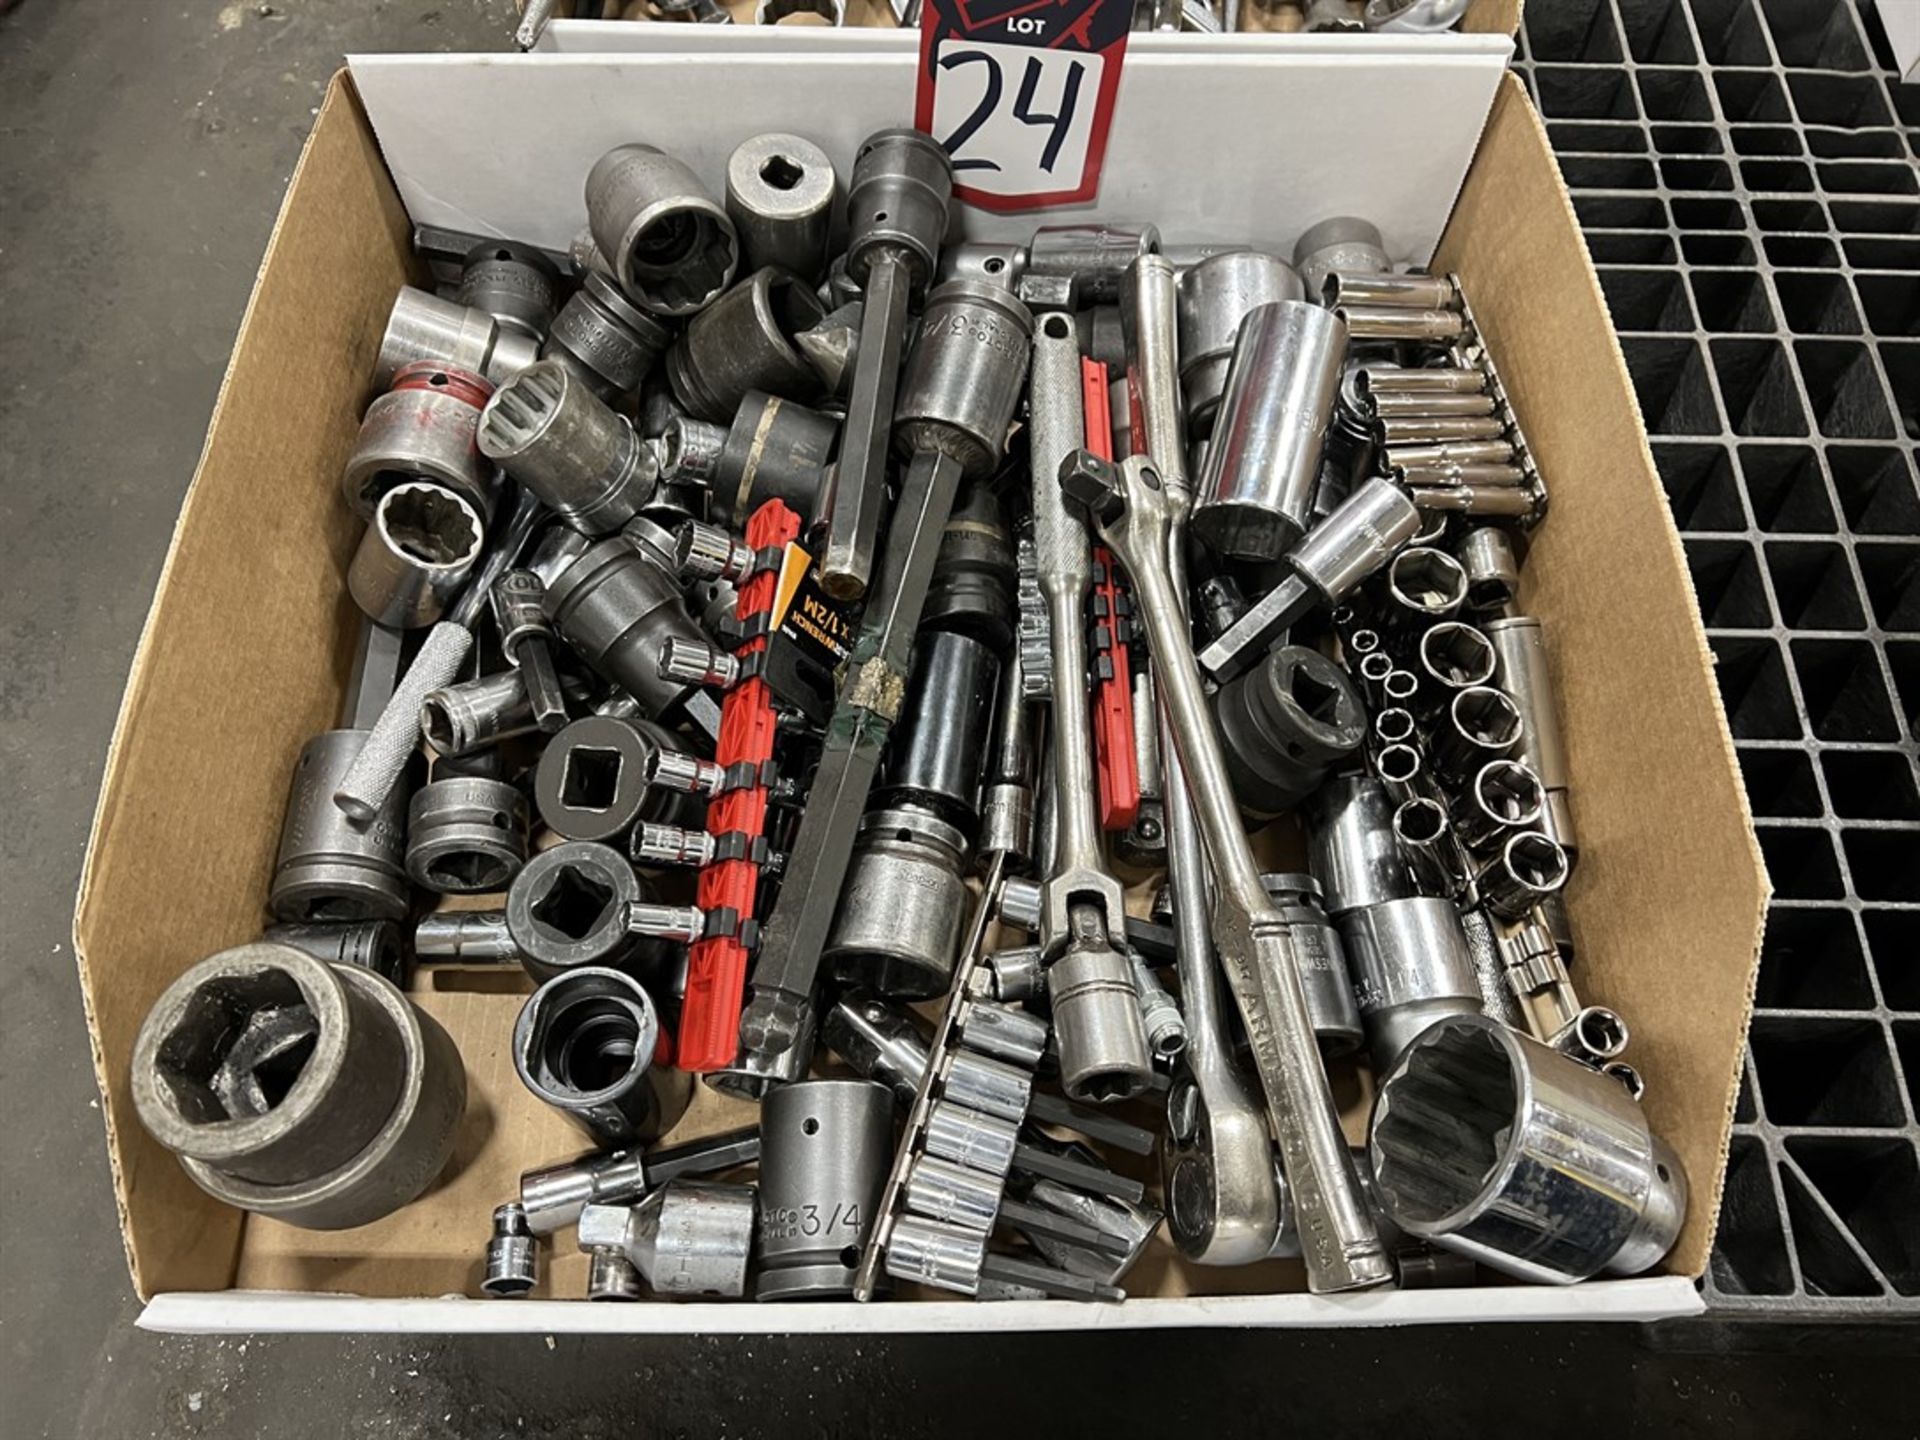 Lot of Assorted Ratchets and Sockets